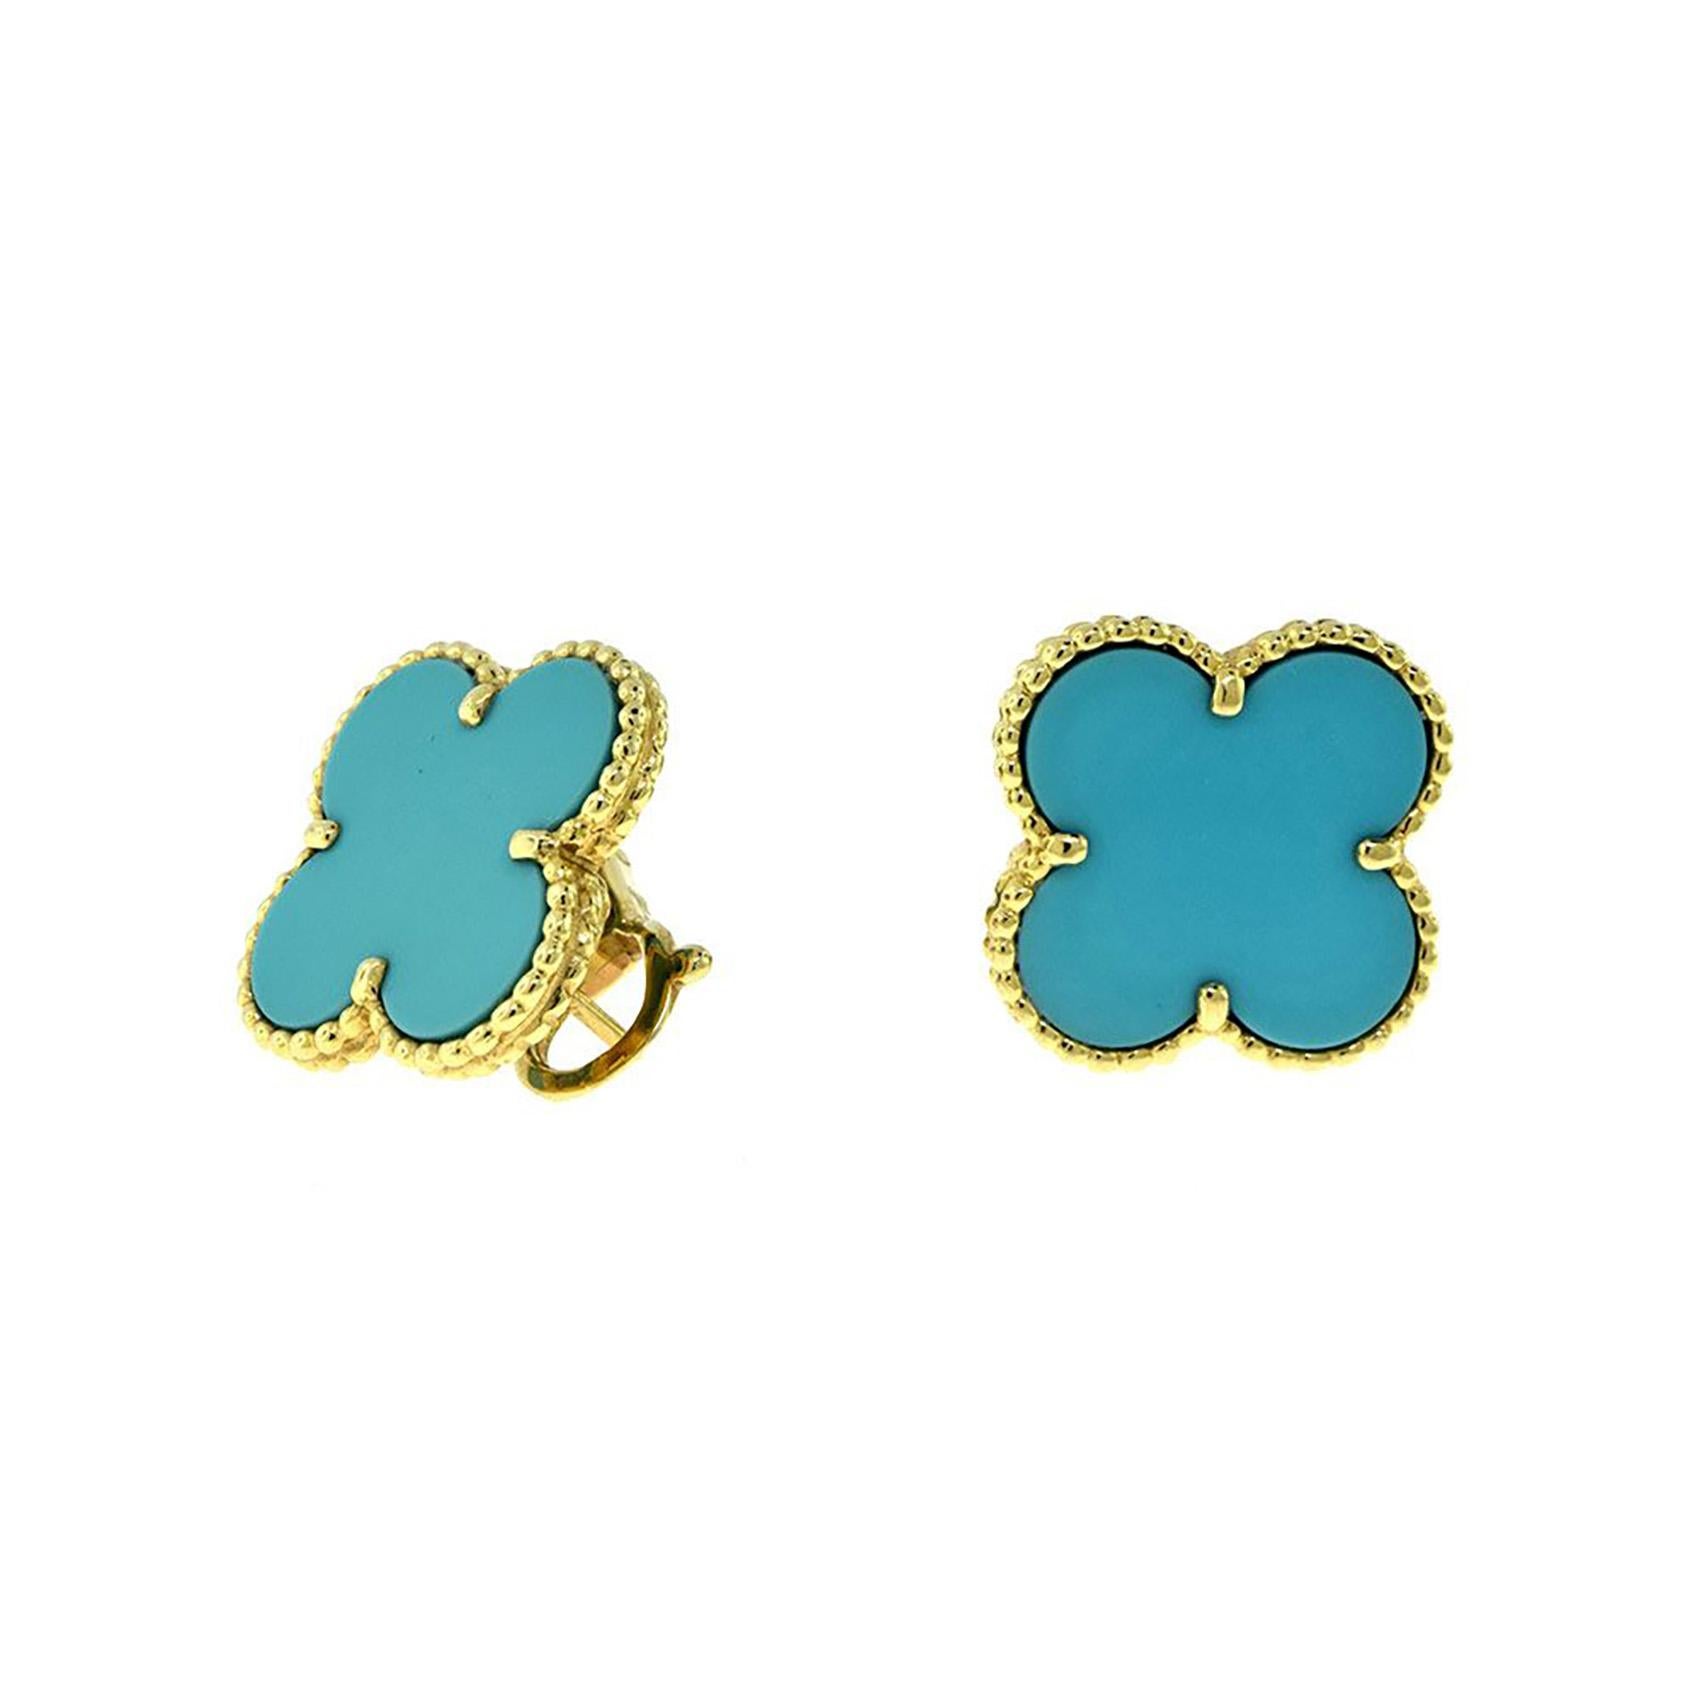 Designer: Van Cleef & Arpels

Collection: Magic Alhambra

Metal: Yellow Gold

Metal Purity: 18k

Dimensions: 20.1 x 20.1 mm 

Stone: Turquoise

Signature: VCA

Hallmark: 750 Serial Number (blocked for privacy) VCA